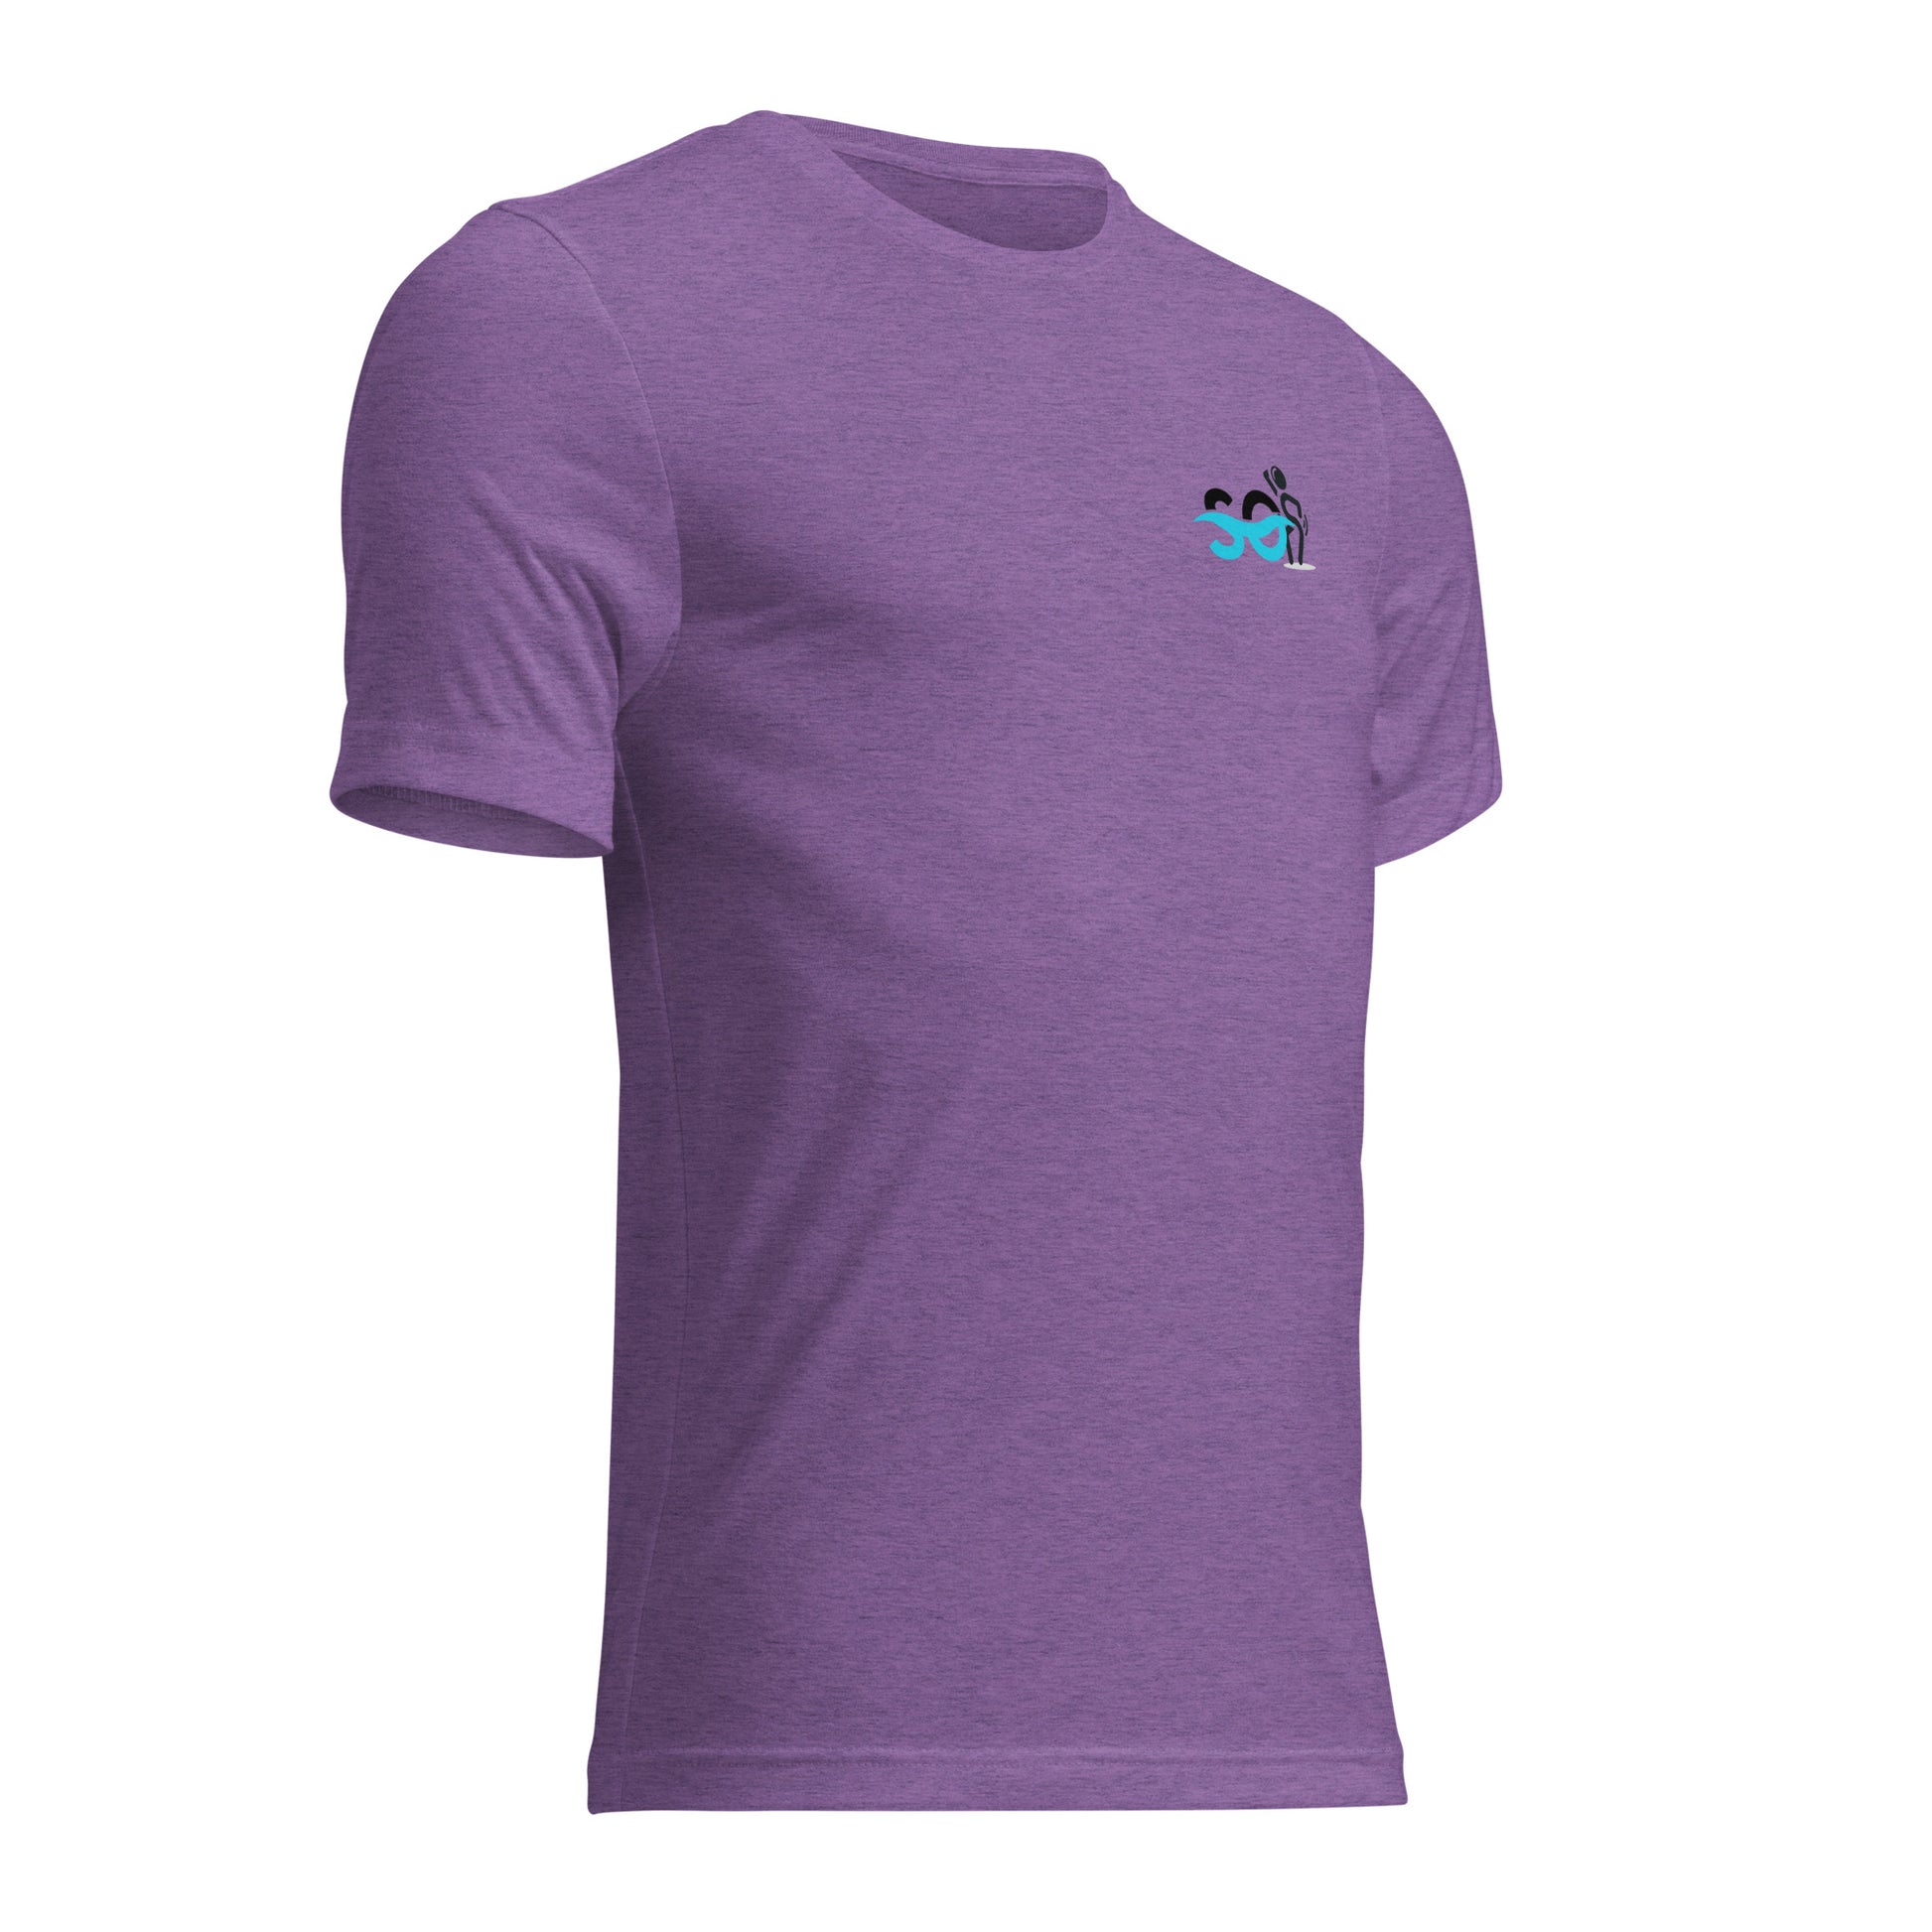 a purple t - shirt with a picture of a horse on it